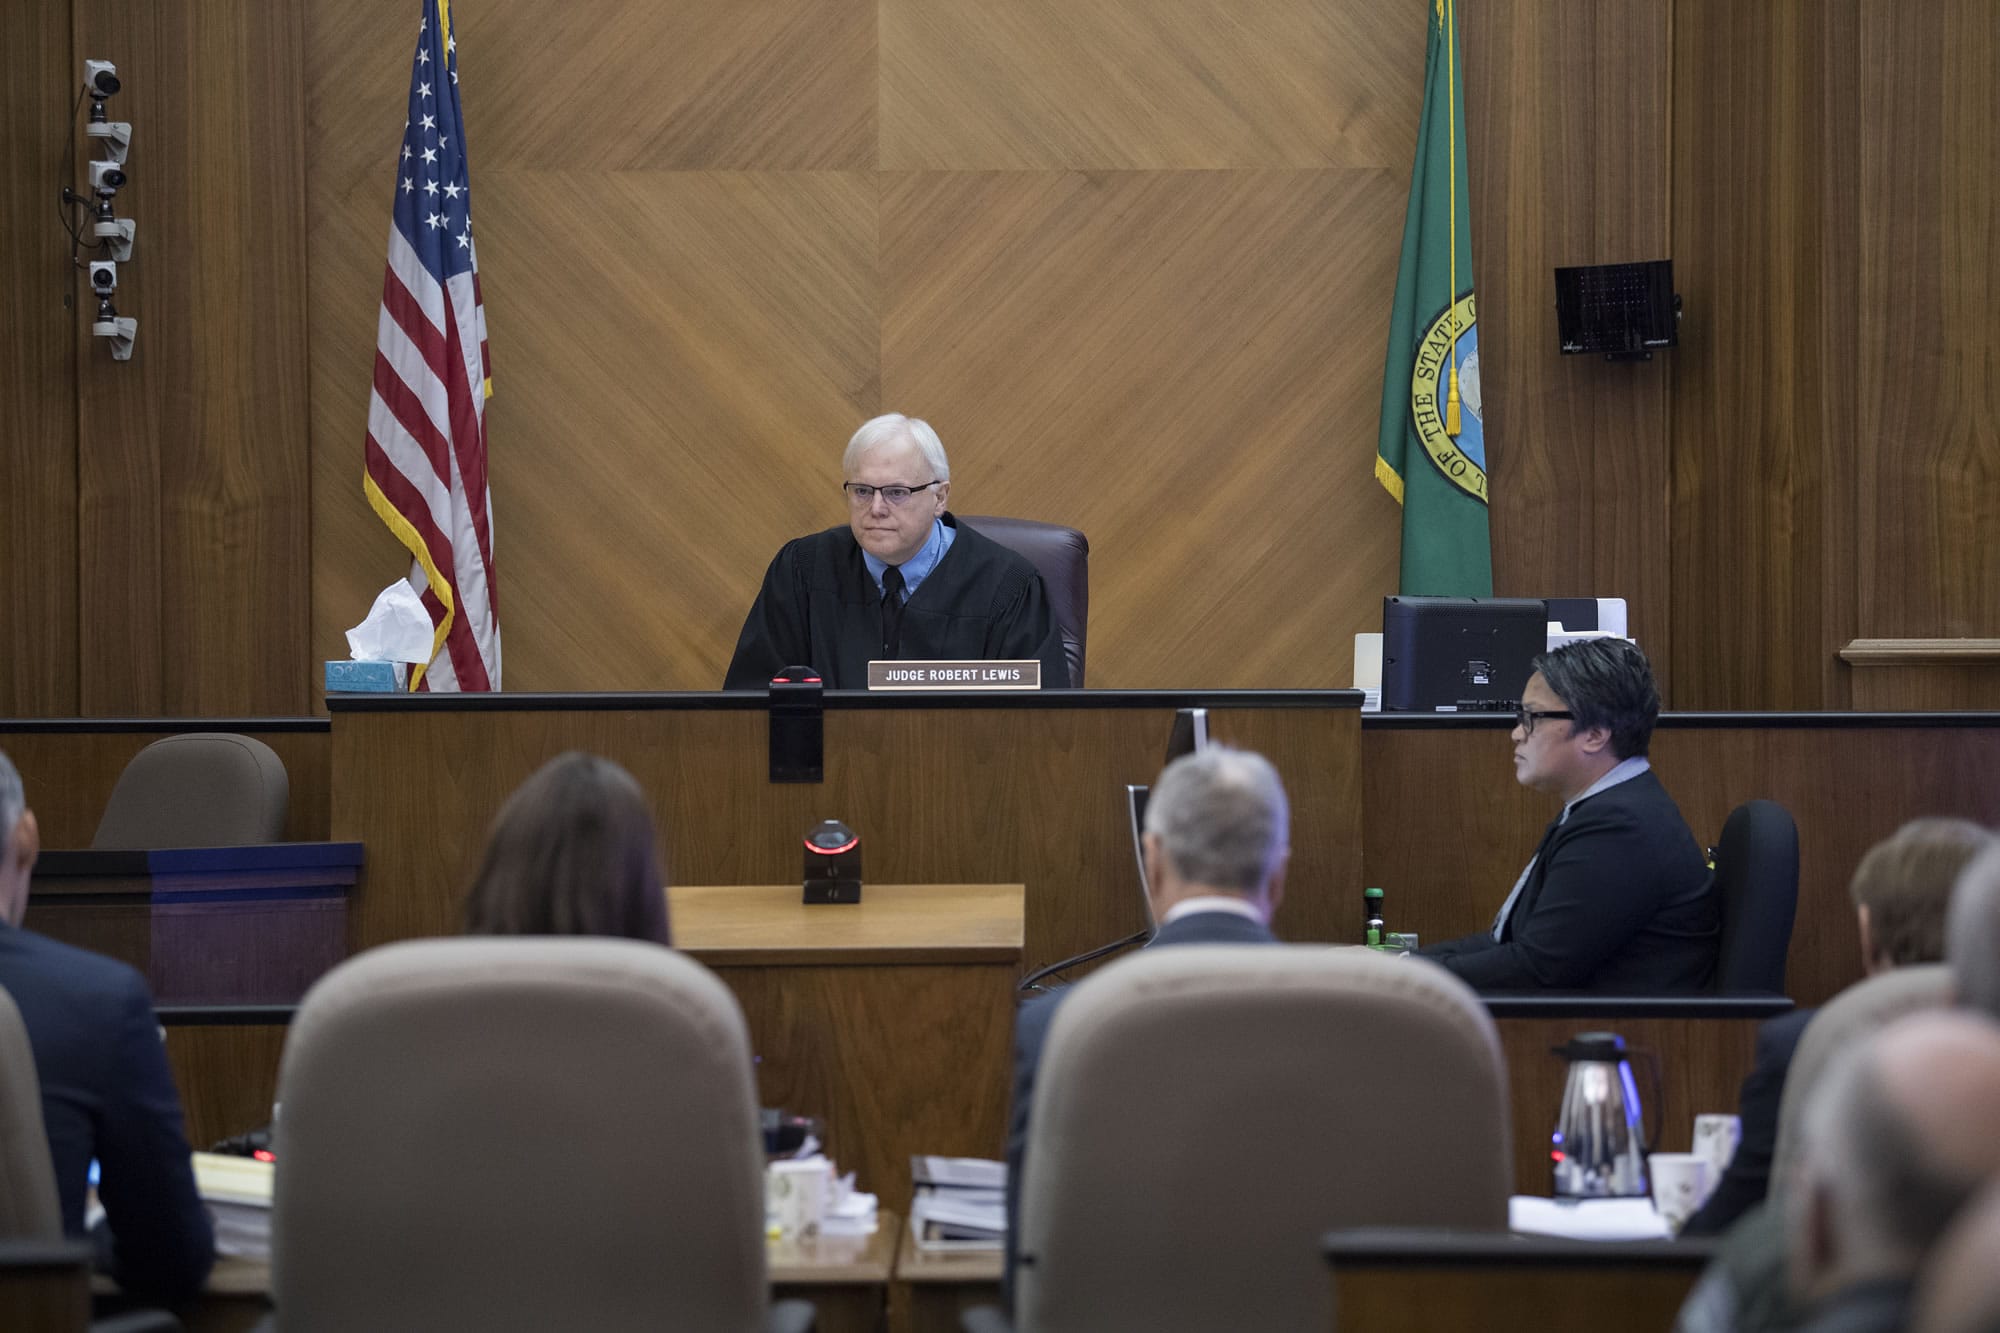 Judge Robert Lewis presides over Brent Luyster's triple aggravated murder trial in Clark County Superior Court on Wednesday morning, Nov. 1, 2017.